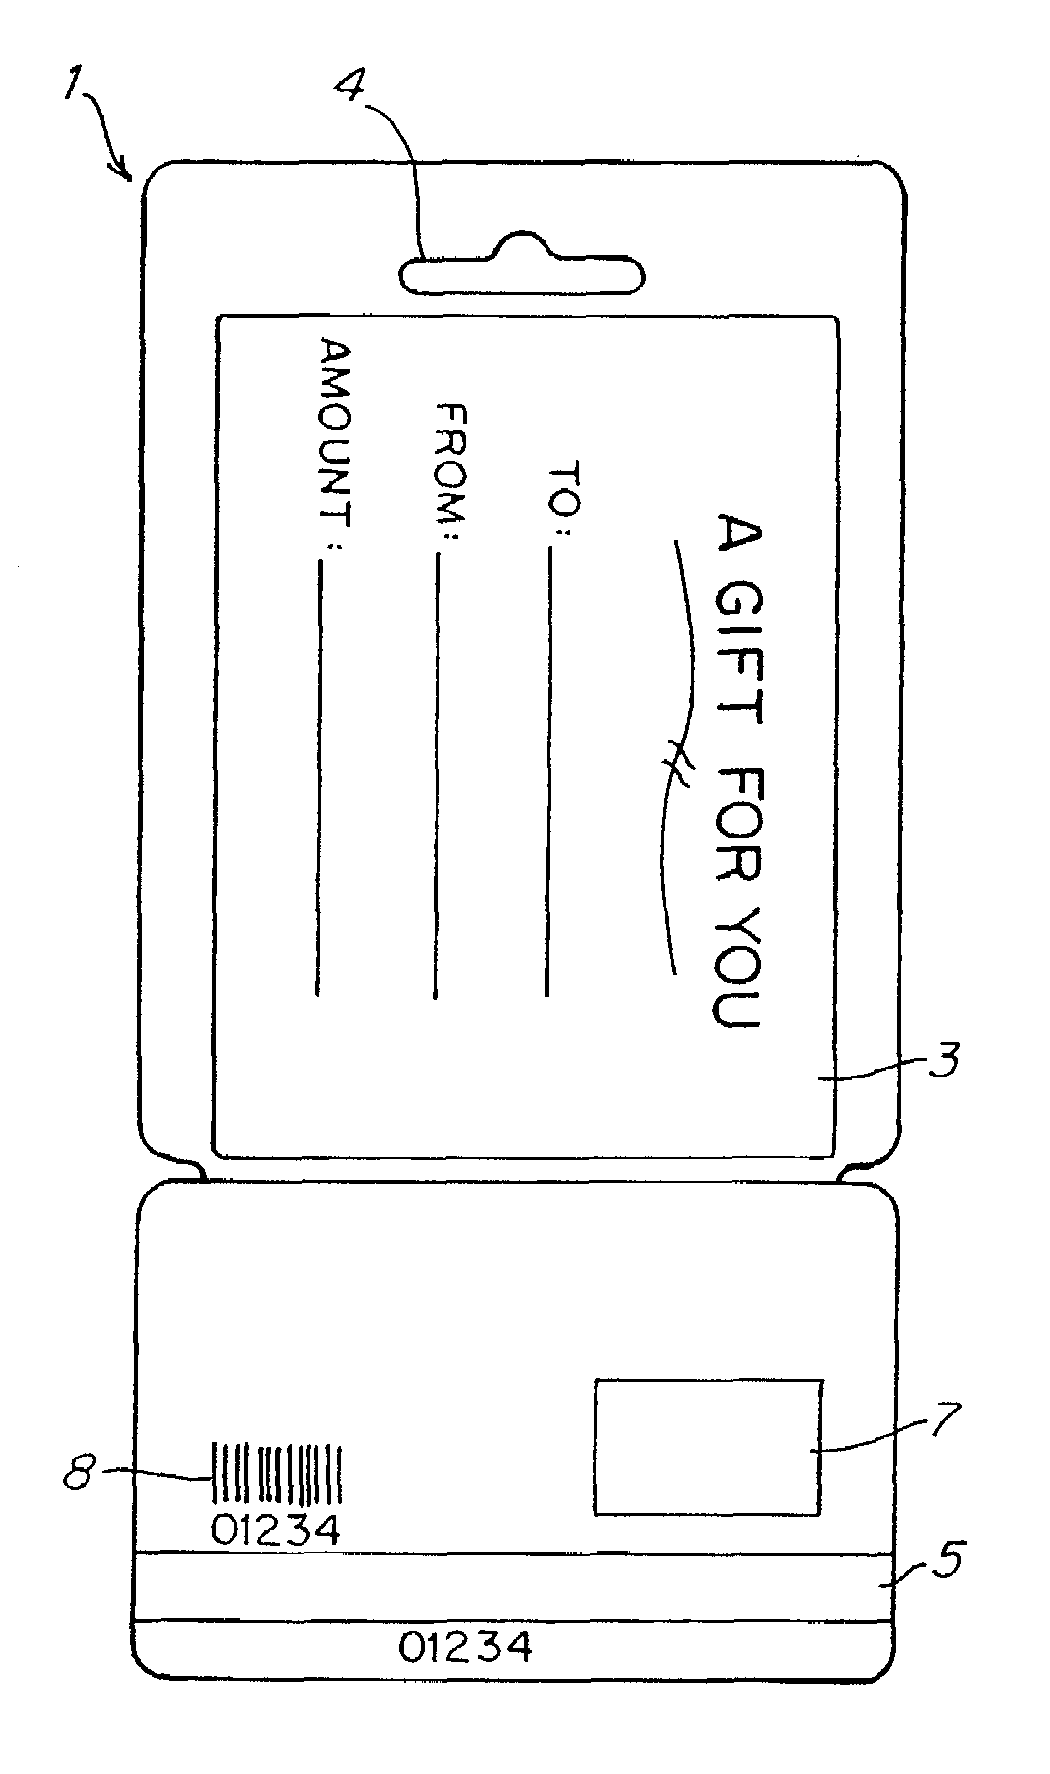 Transaction card and envelope assembly